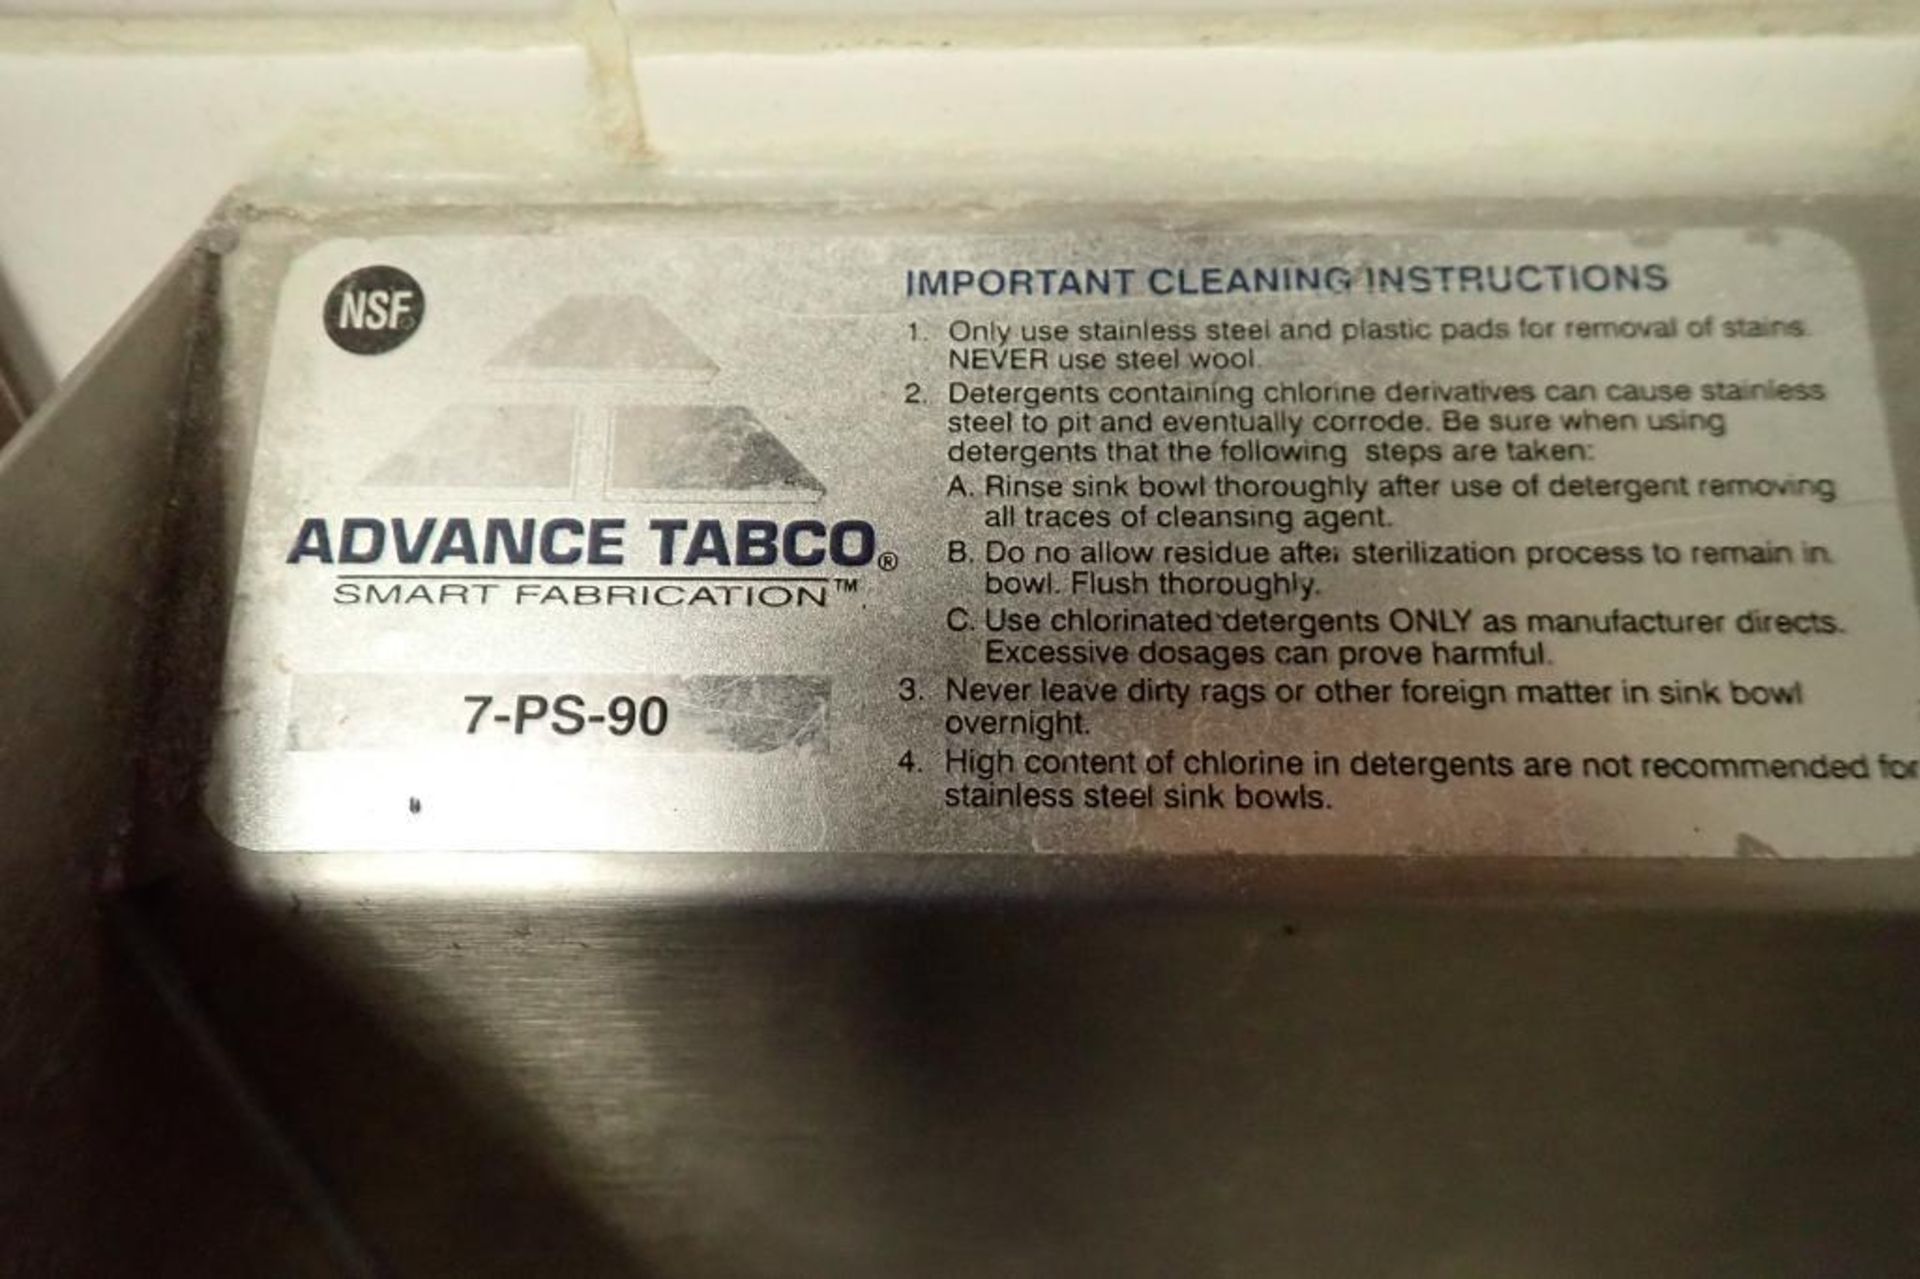 Advance Tabco SS foot operated sink, 17 in. wide x 16 in. deep x 42 in. tall, Model 7-PS-90 - Image 3 of 5